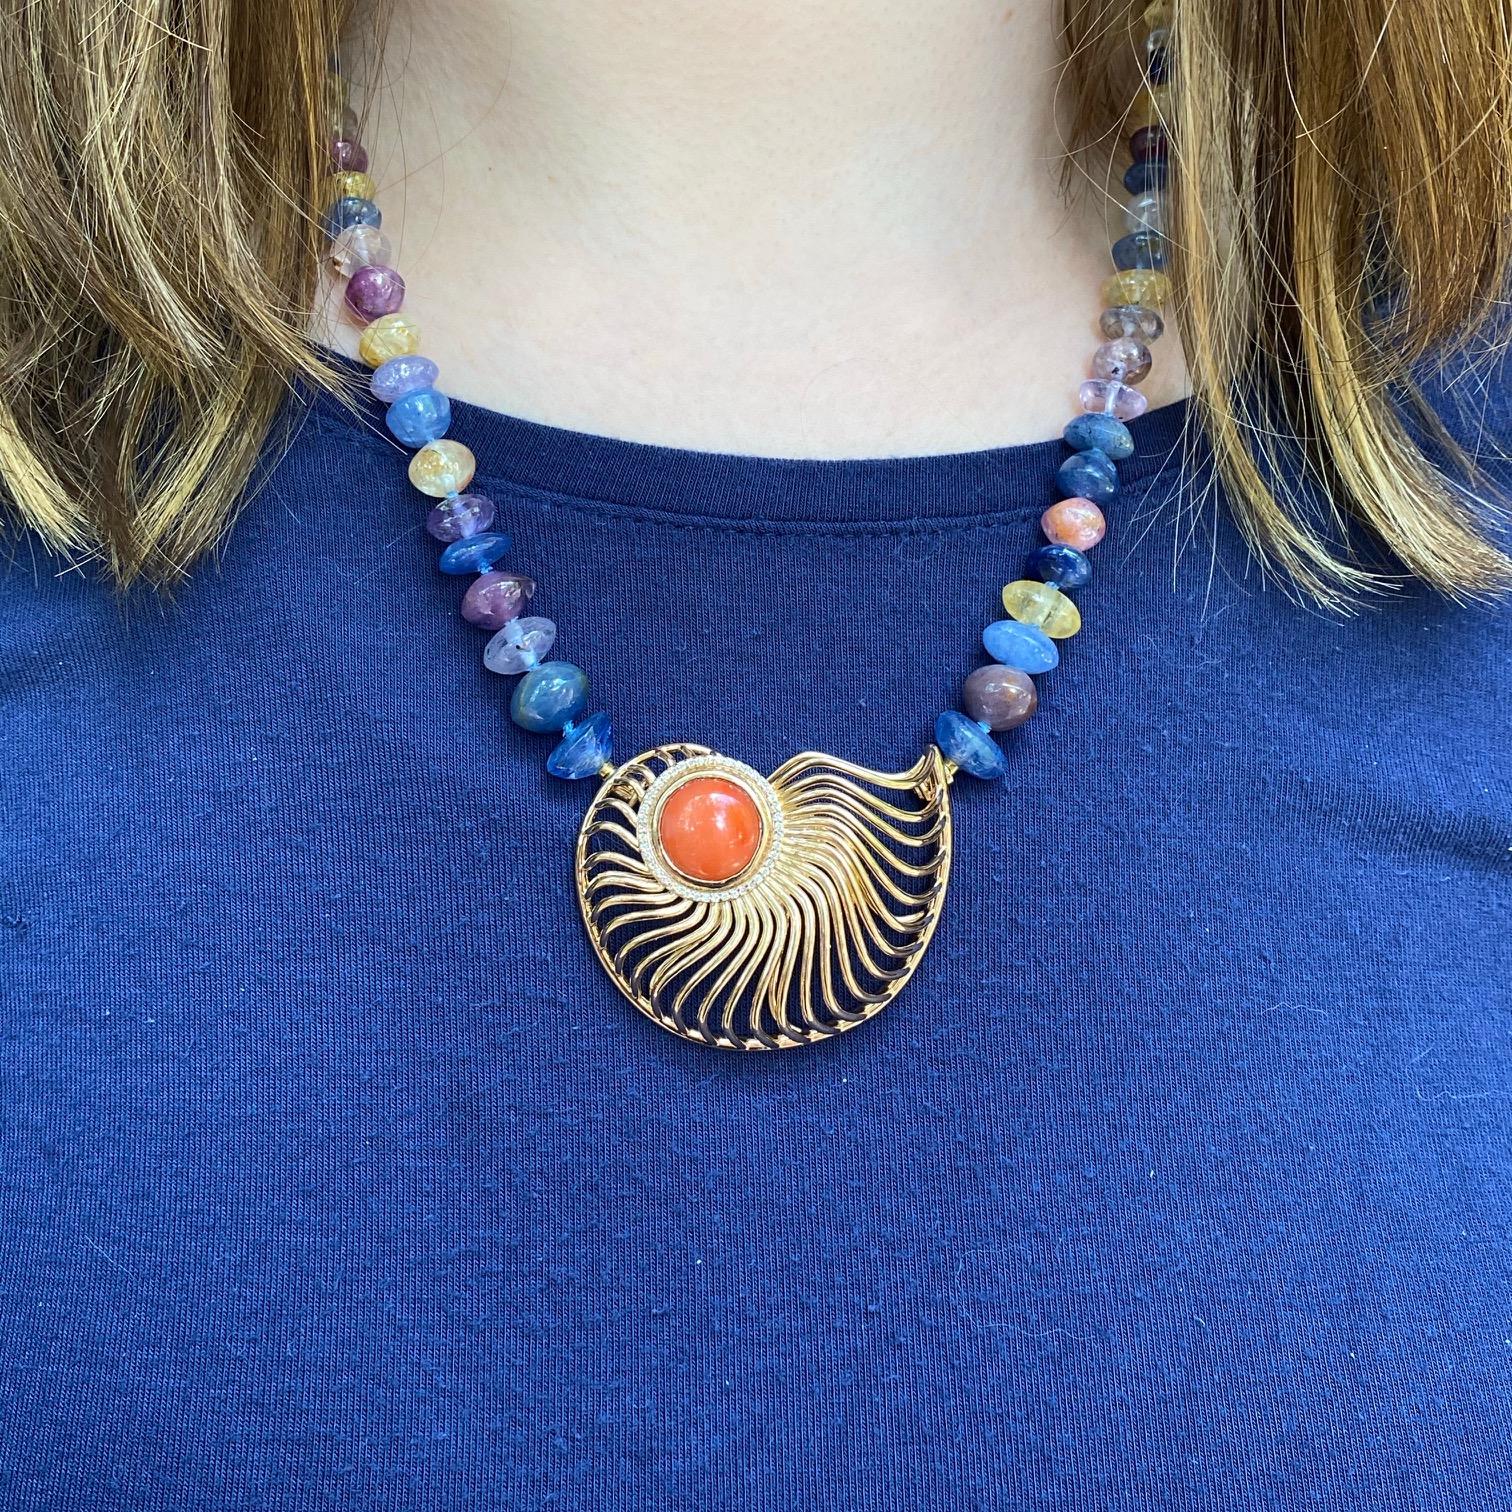 Cabochon Multicolored Rondell Sapphire Necklace with an 18 Karat Rose Gold Ammonite Clasp